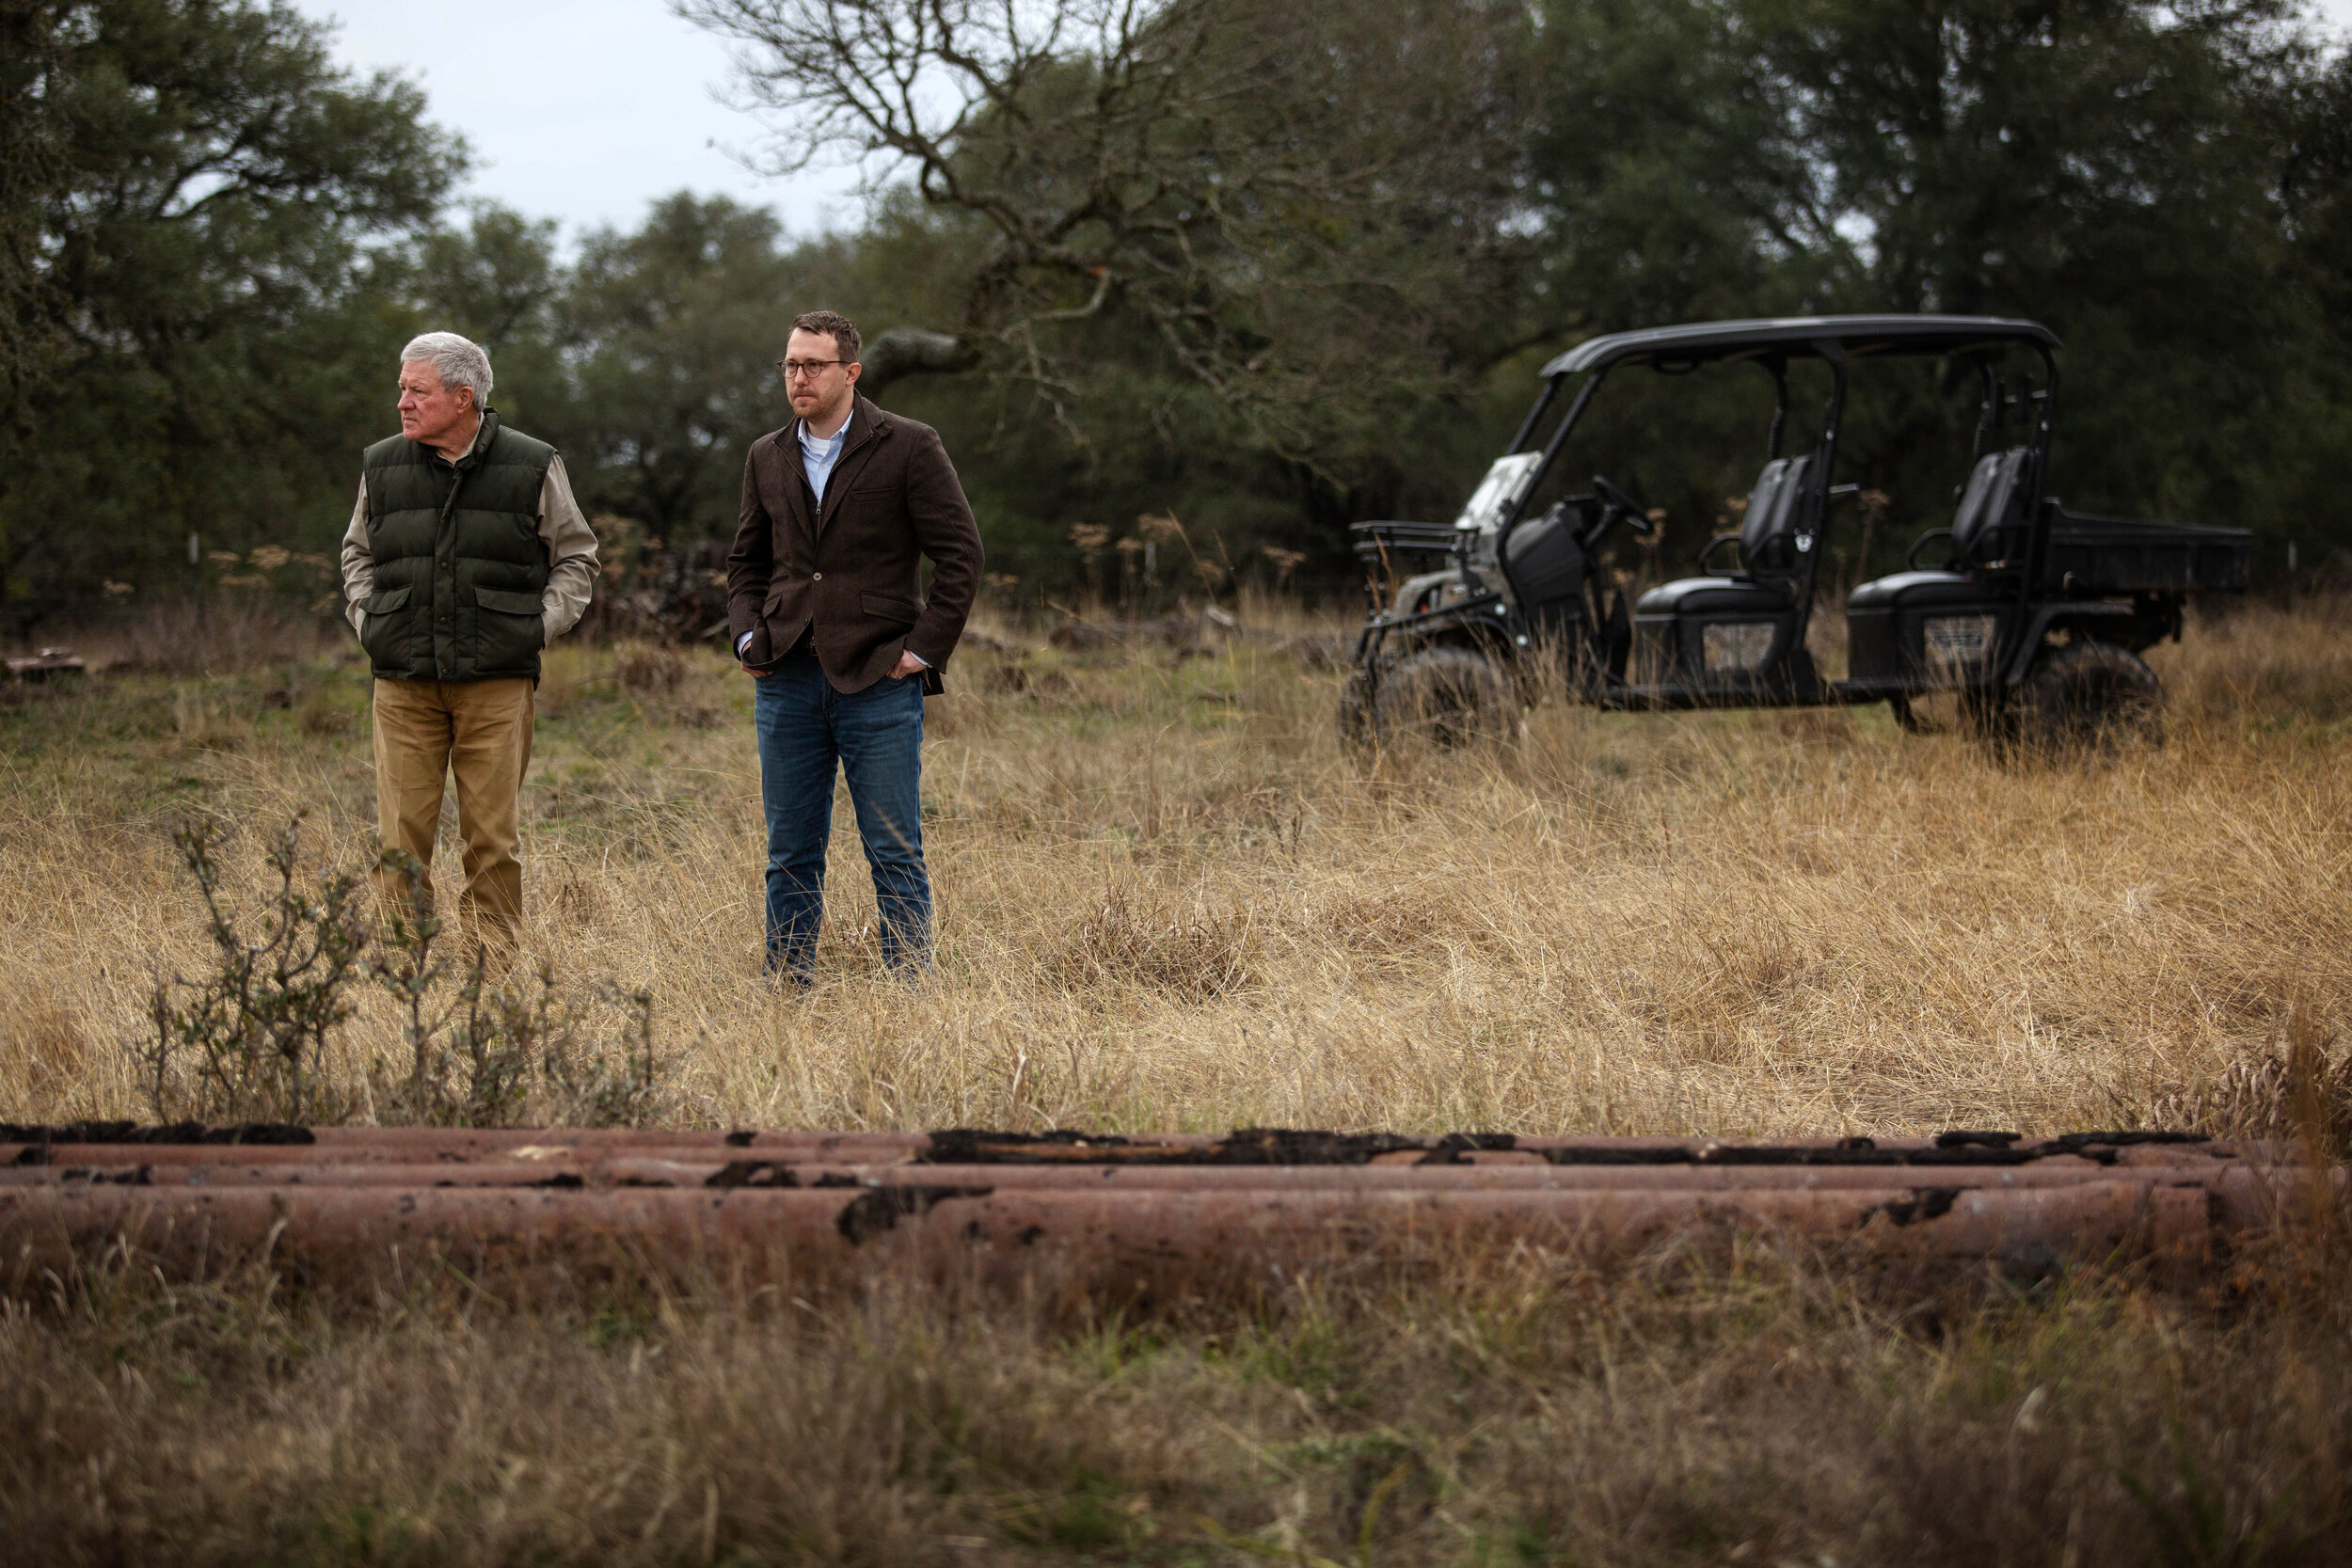  STONEWALL, TX. Landowner Andy Sansom (left) shows lawyer Jacob Merkord remnants of an old pipeline that ran through his property in the early 1900s. The new natural gas pipeline to be constructed by Kinder Morgan will run through Sansom’s property, 